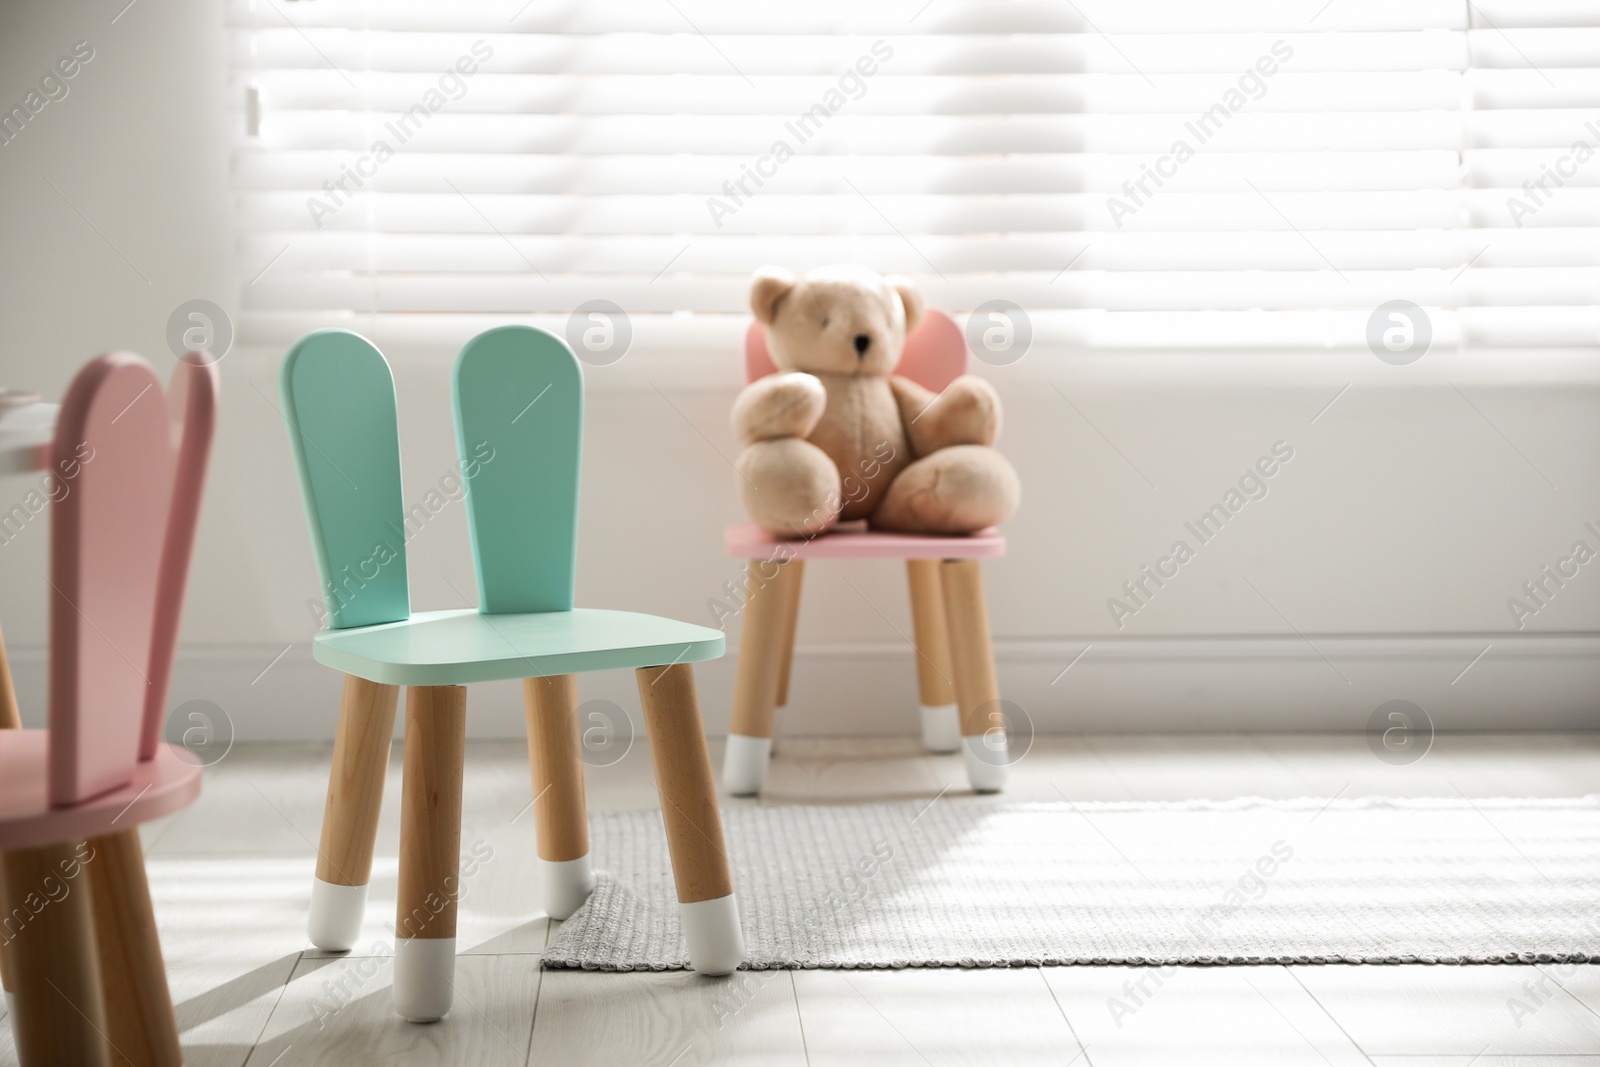 Photo of Cute little chair with bunny ears indoors. Children's room interior